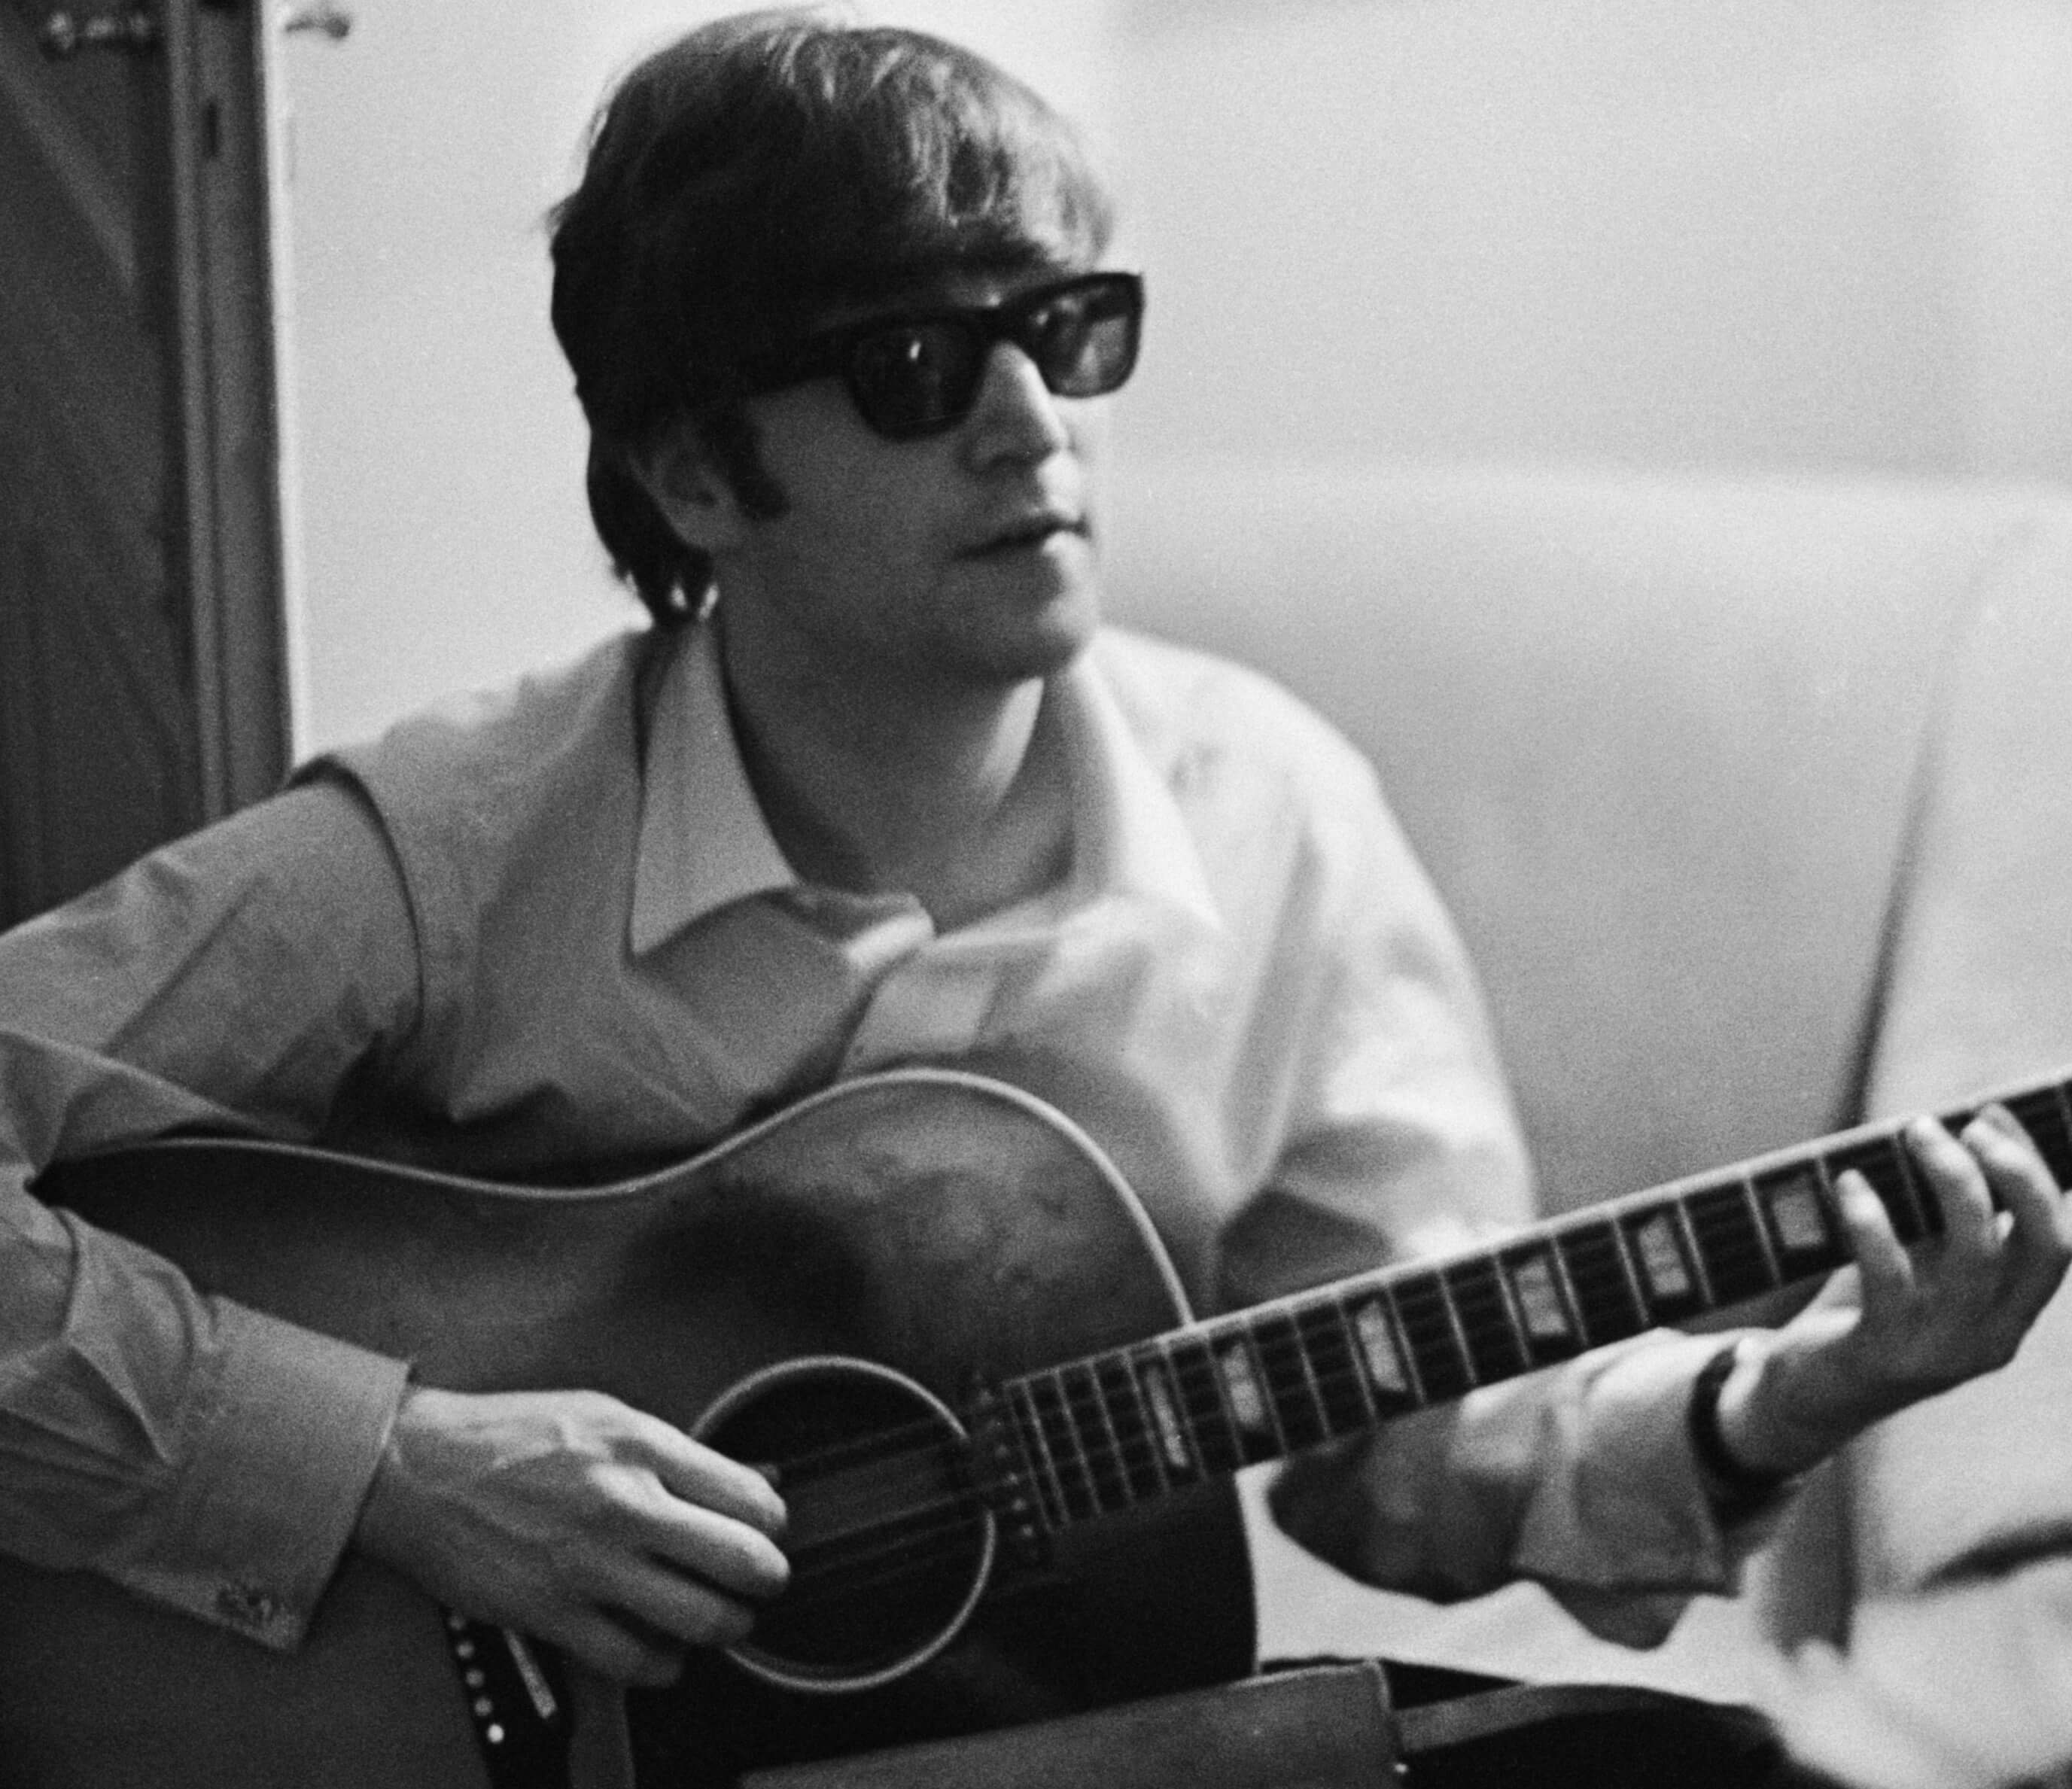 John Lennon playing a song on a guitar